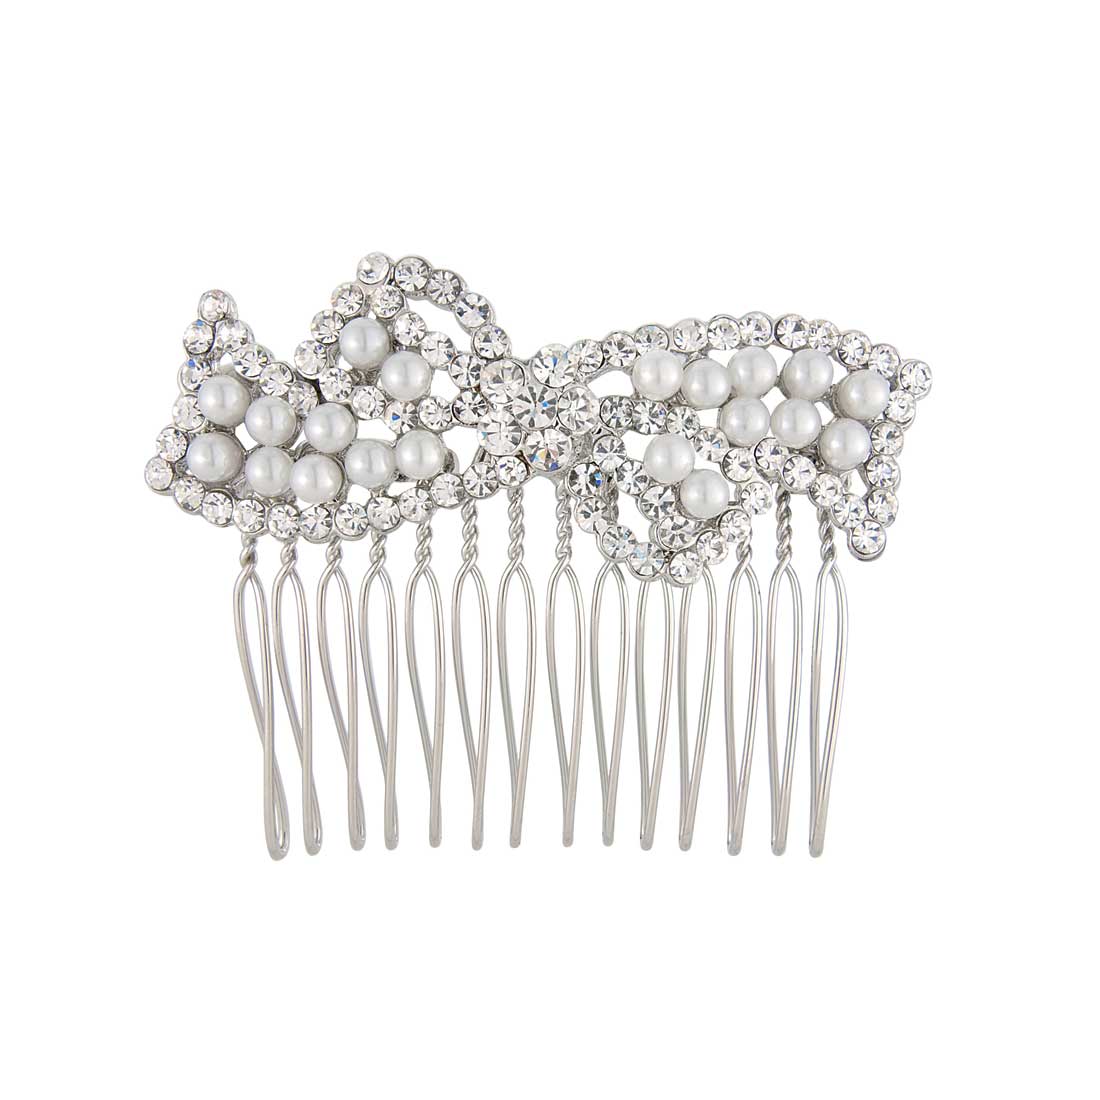 Bow of Pearls Small Hair Comb for Weddings & Bridesmaids